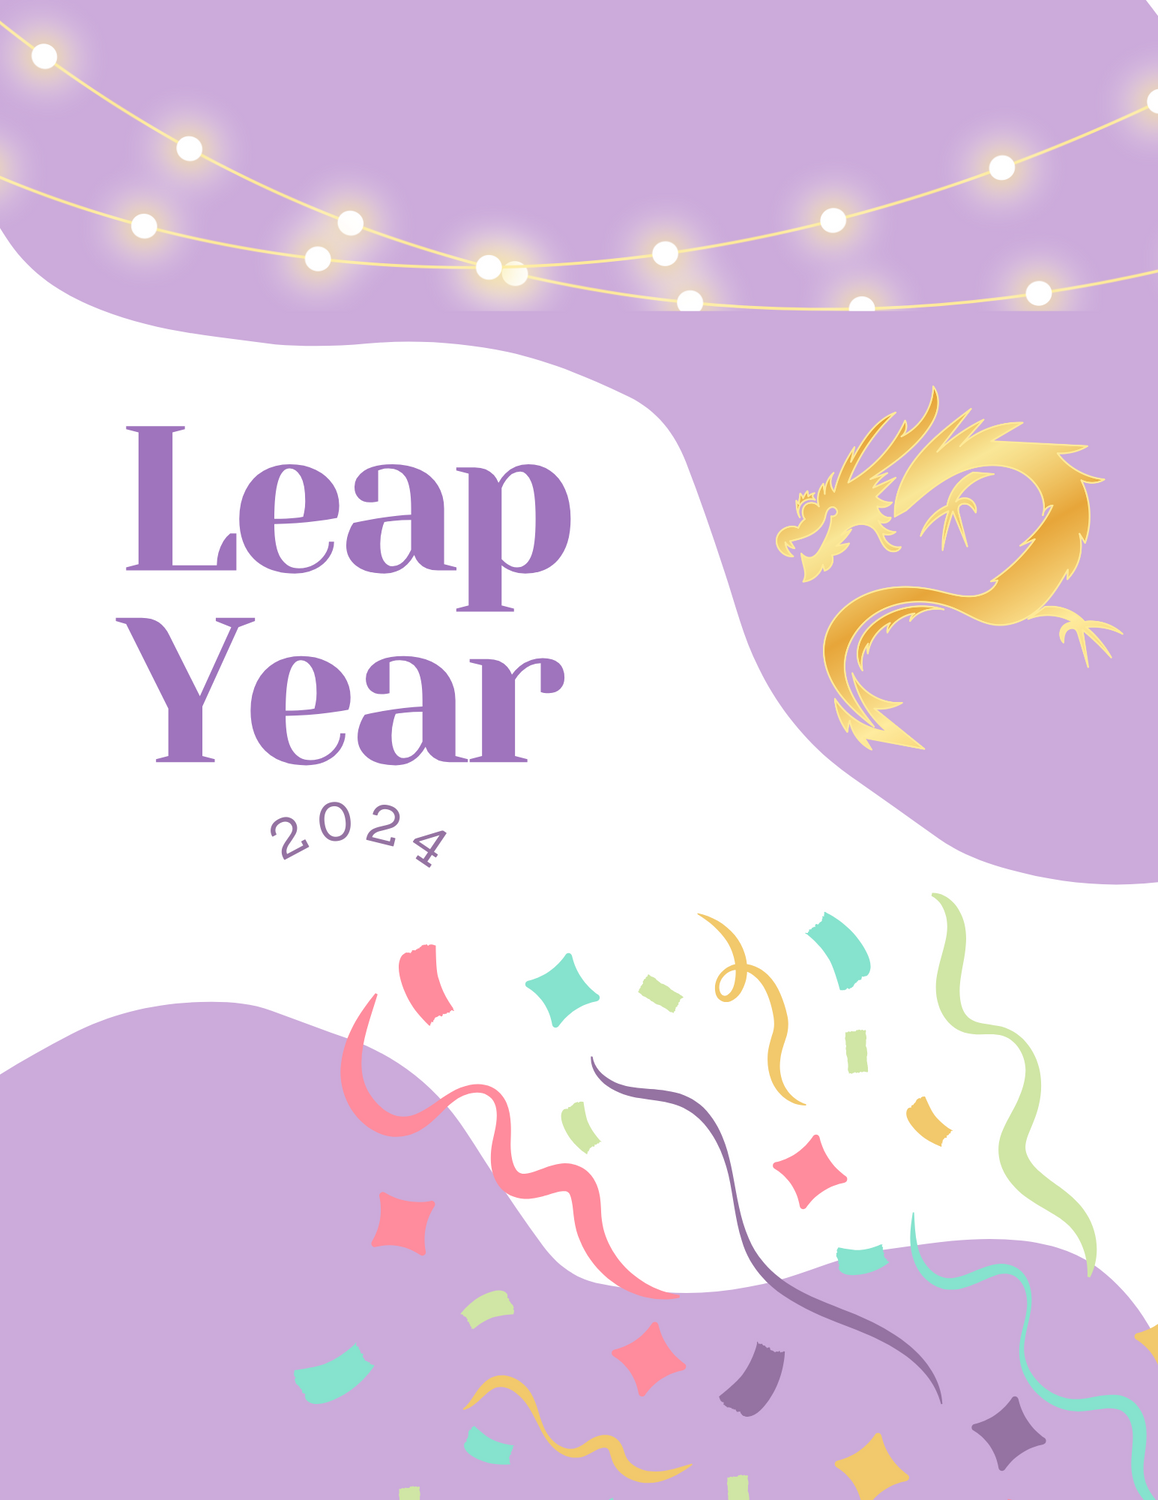 The first leap year since the pandemic began in 2020 is here! This year, according to the Chinese zodiac, it is the Year of the Dragon. 